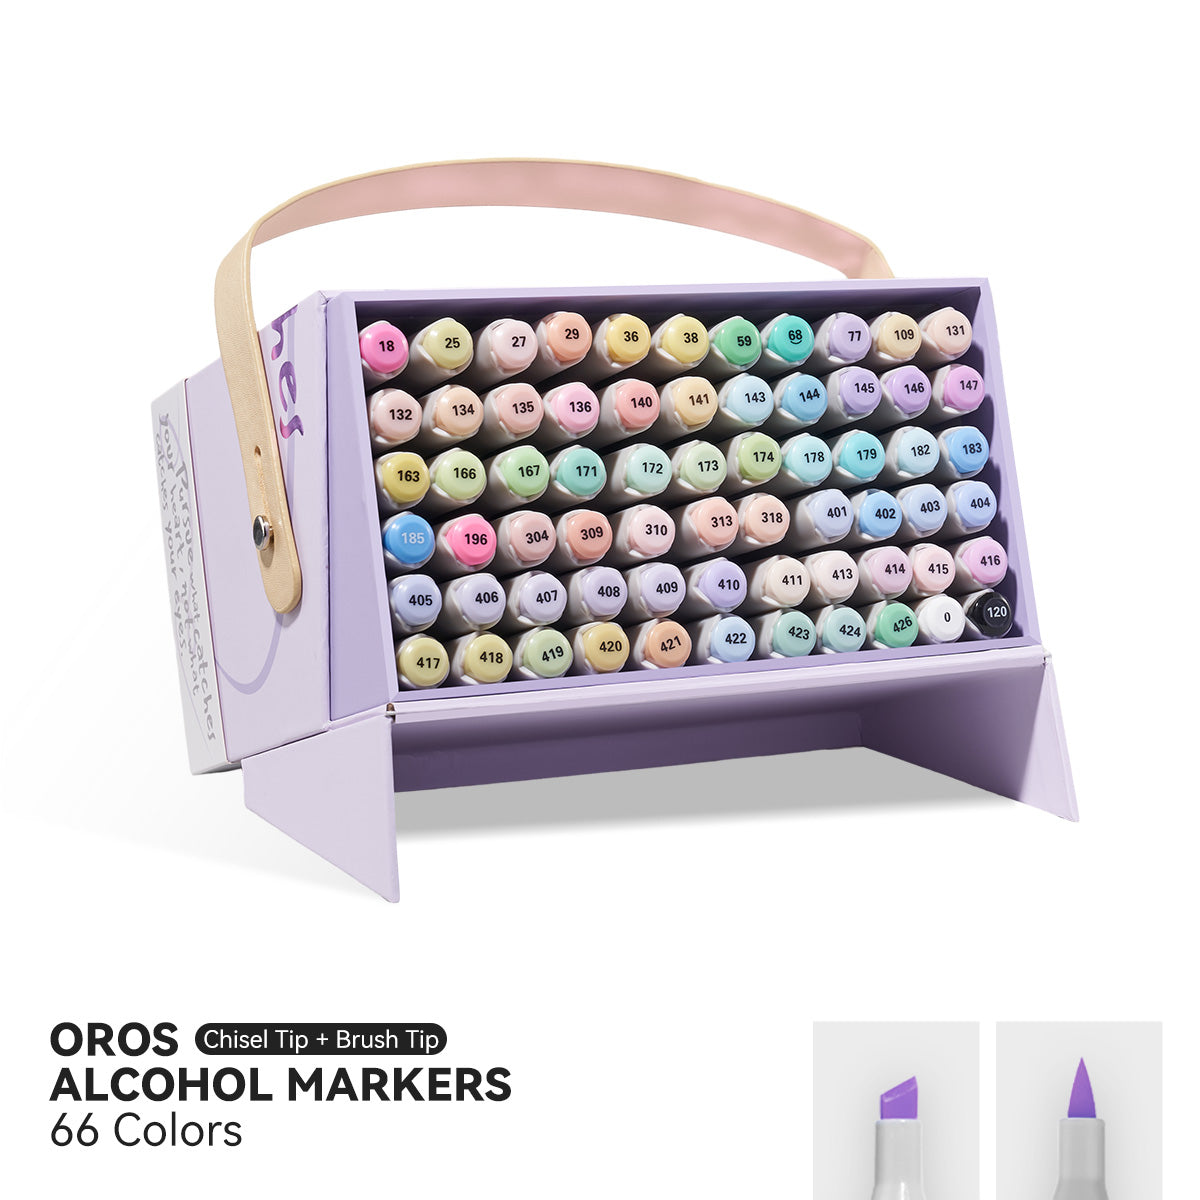 Arrtx Alcohol Markers, Alcohol Markers Set